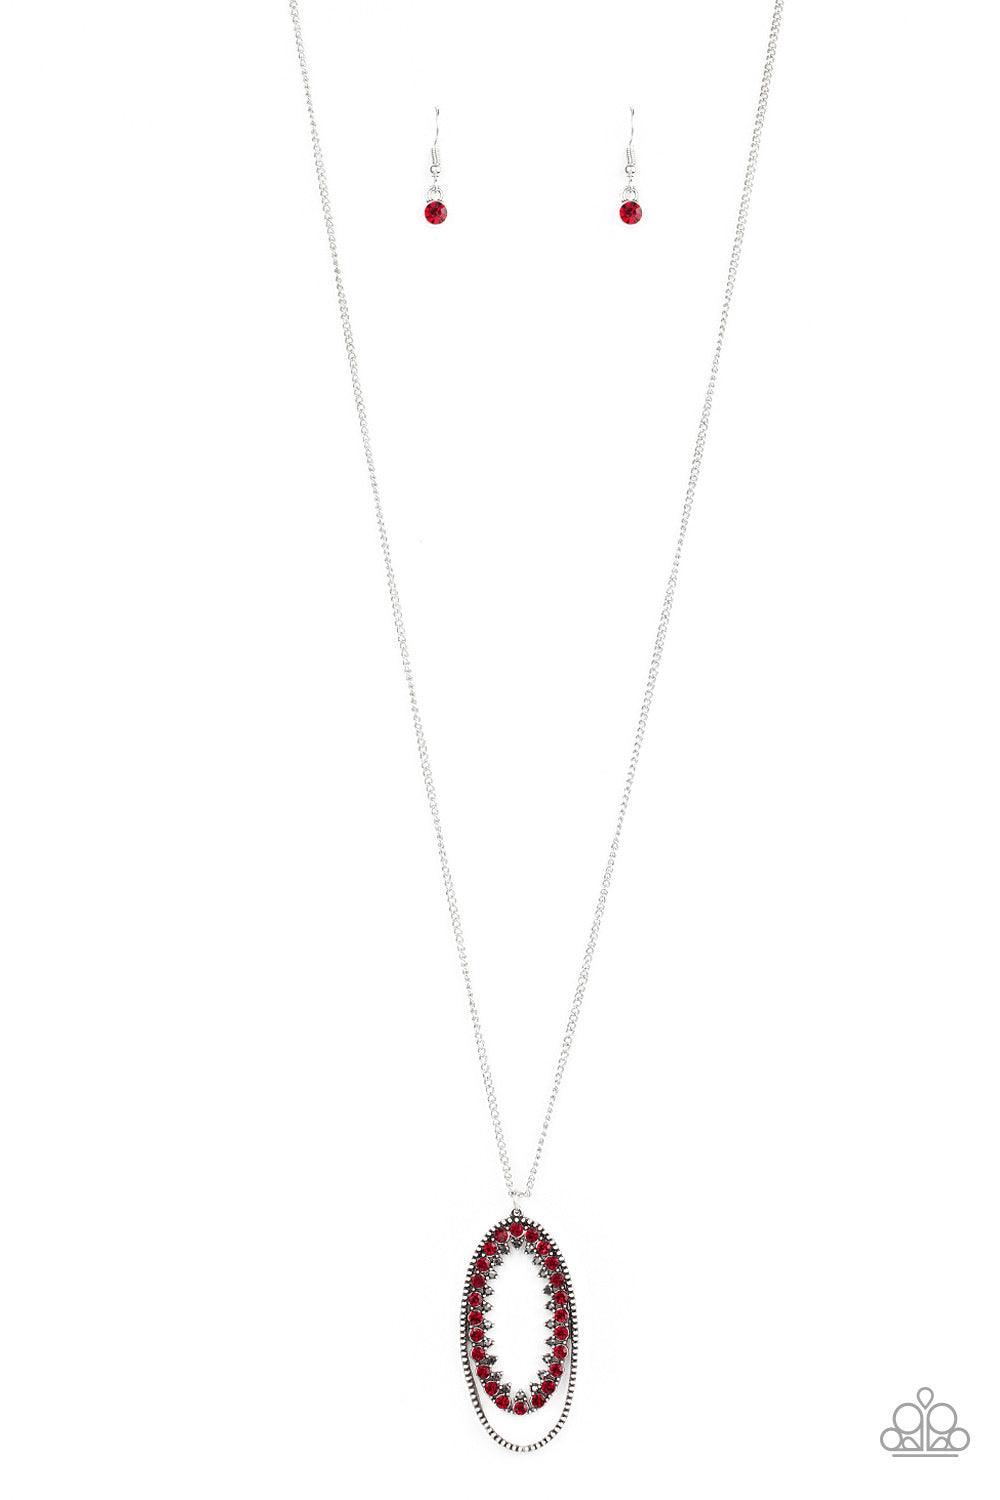 Paparazzi Accessories Money Mood - Red Ringed in a studded silver frame, glittery red and hematite rhinestones collect into a glamorous pendant at the bottom of a lengthened silver chain for a refined flair. Features an adjustable clasp closure. Jewelry